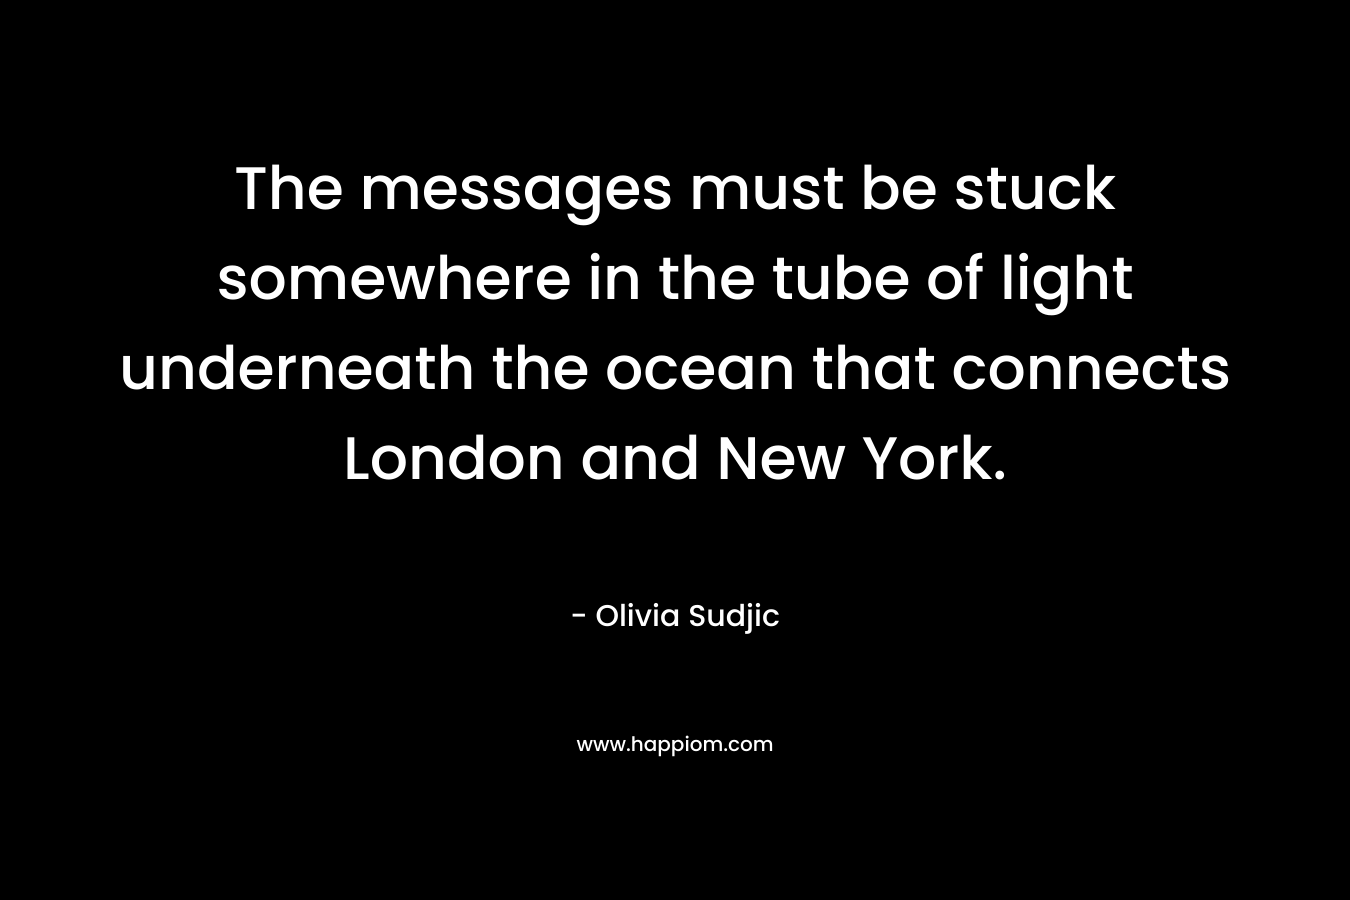 The messages must be stuck somewhere in the tube of light underneath the ocean that connects London and New York. – Olivia Sudjic